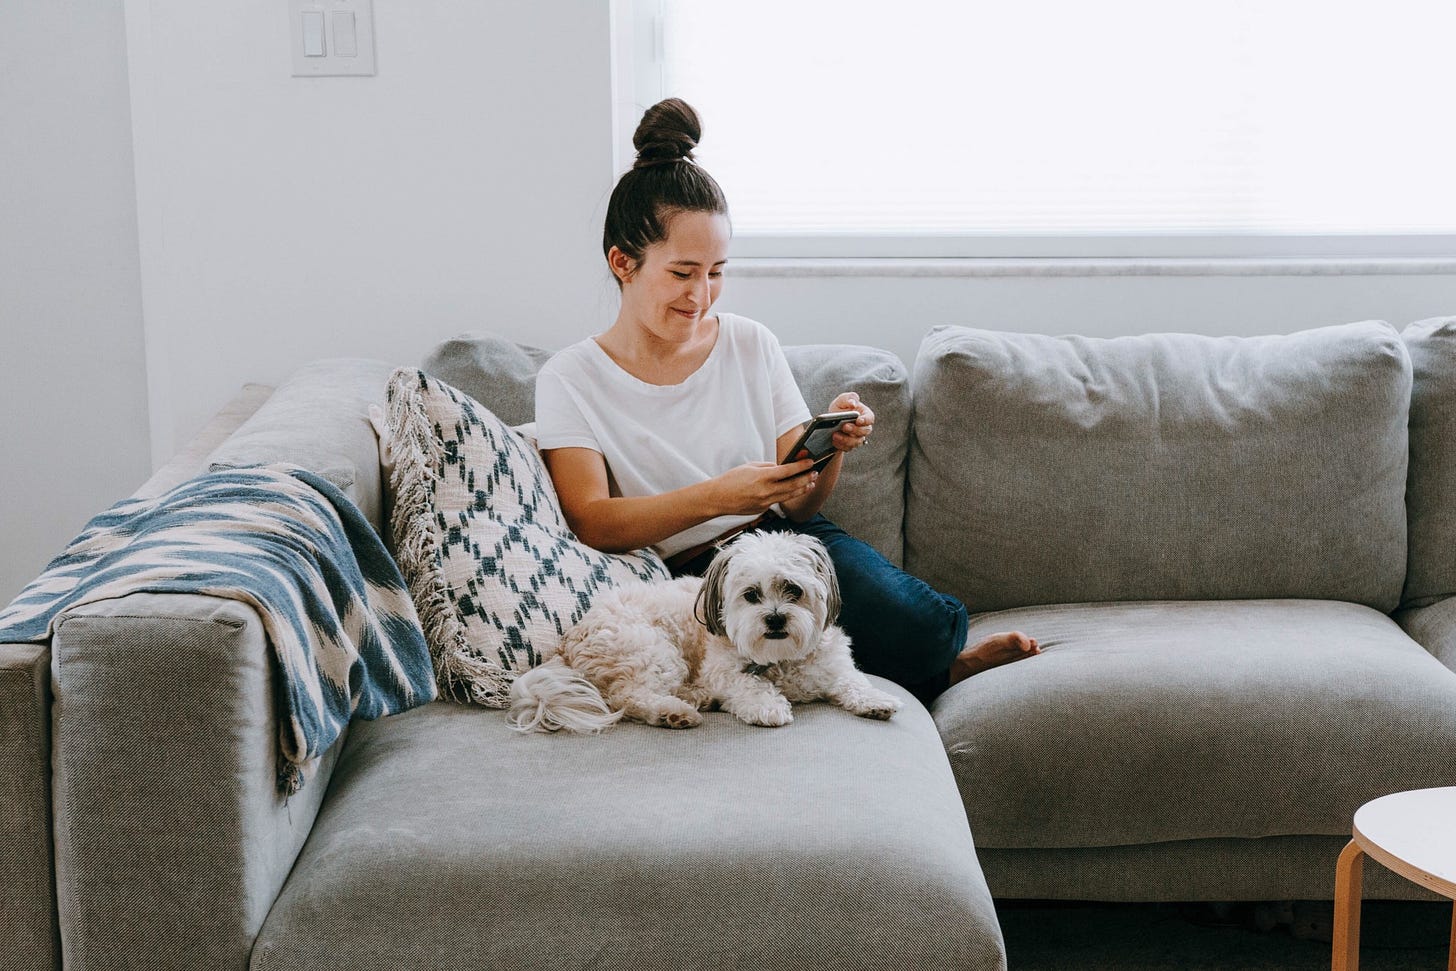 A woman smiles while looking at her phone and sitting next to her dog on the couch.